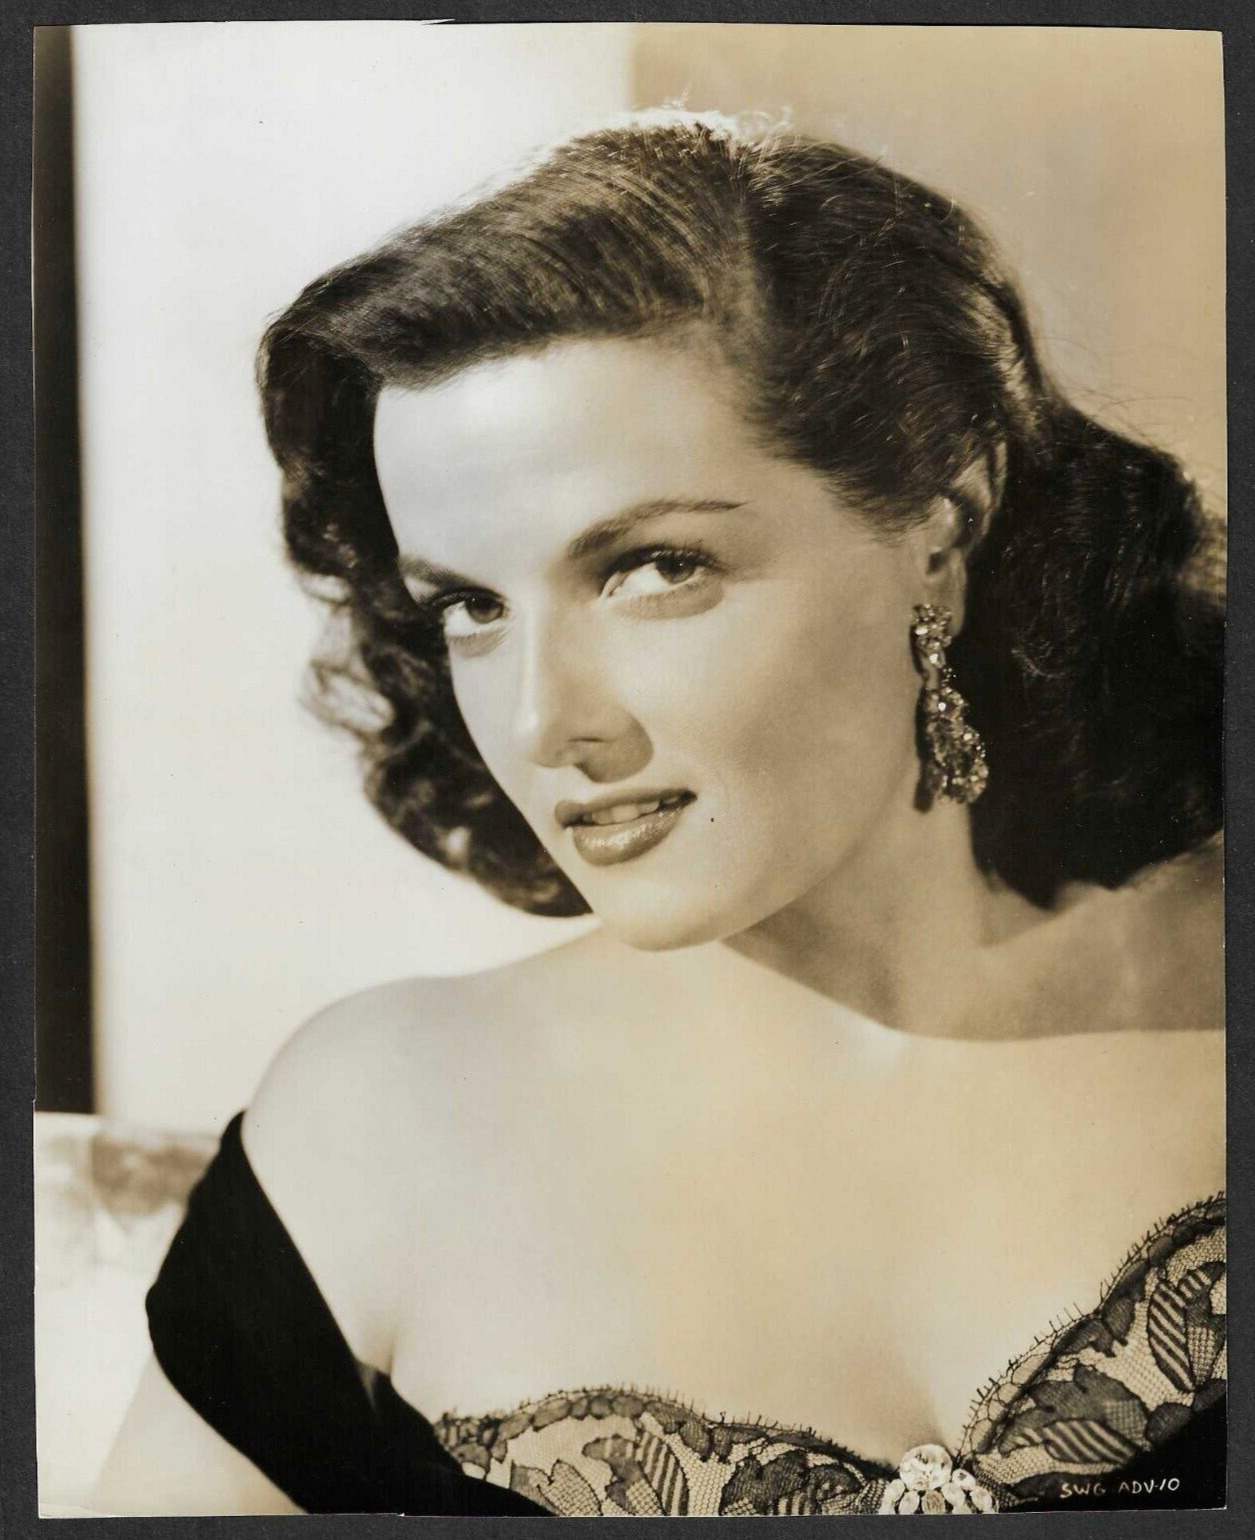 HOLLYWOOD JANE RUSSELL ACTRESS VINTAGE 1947 ORIGINAL PHOTO